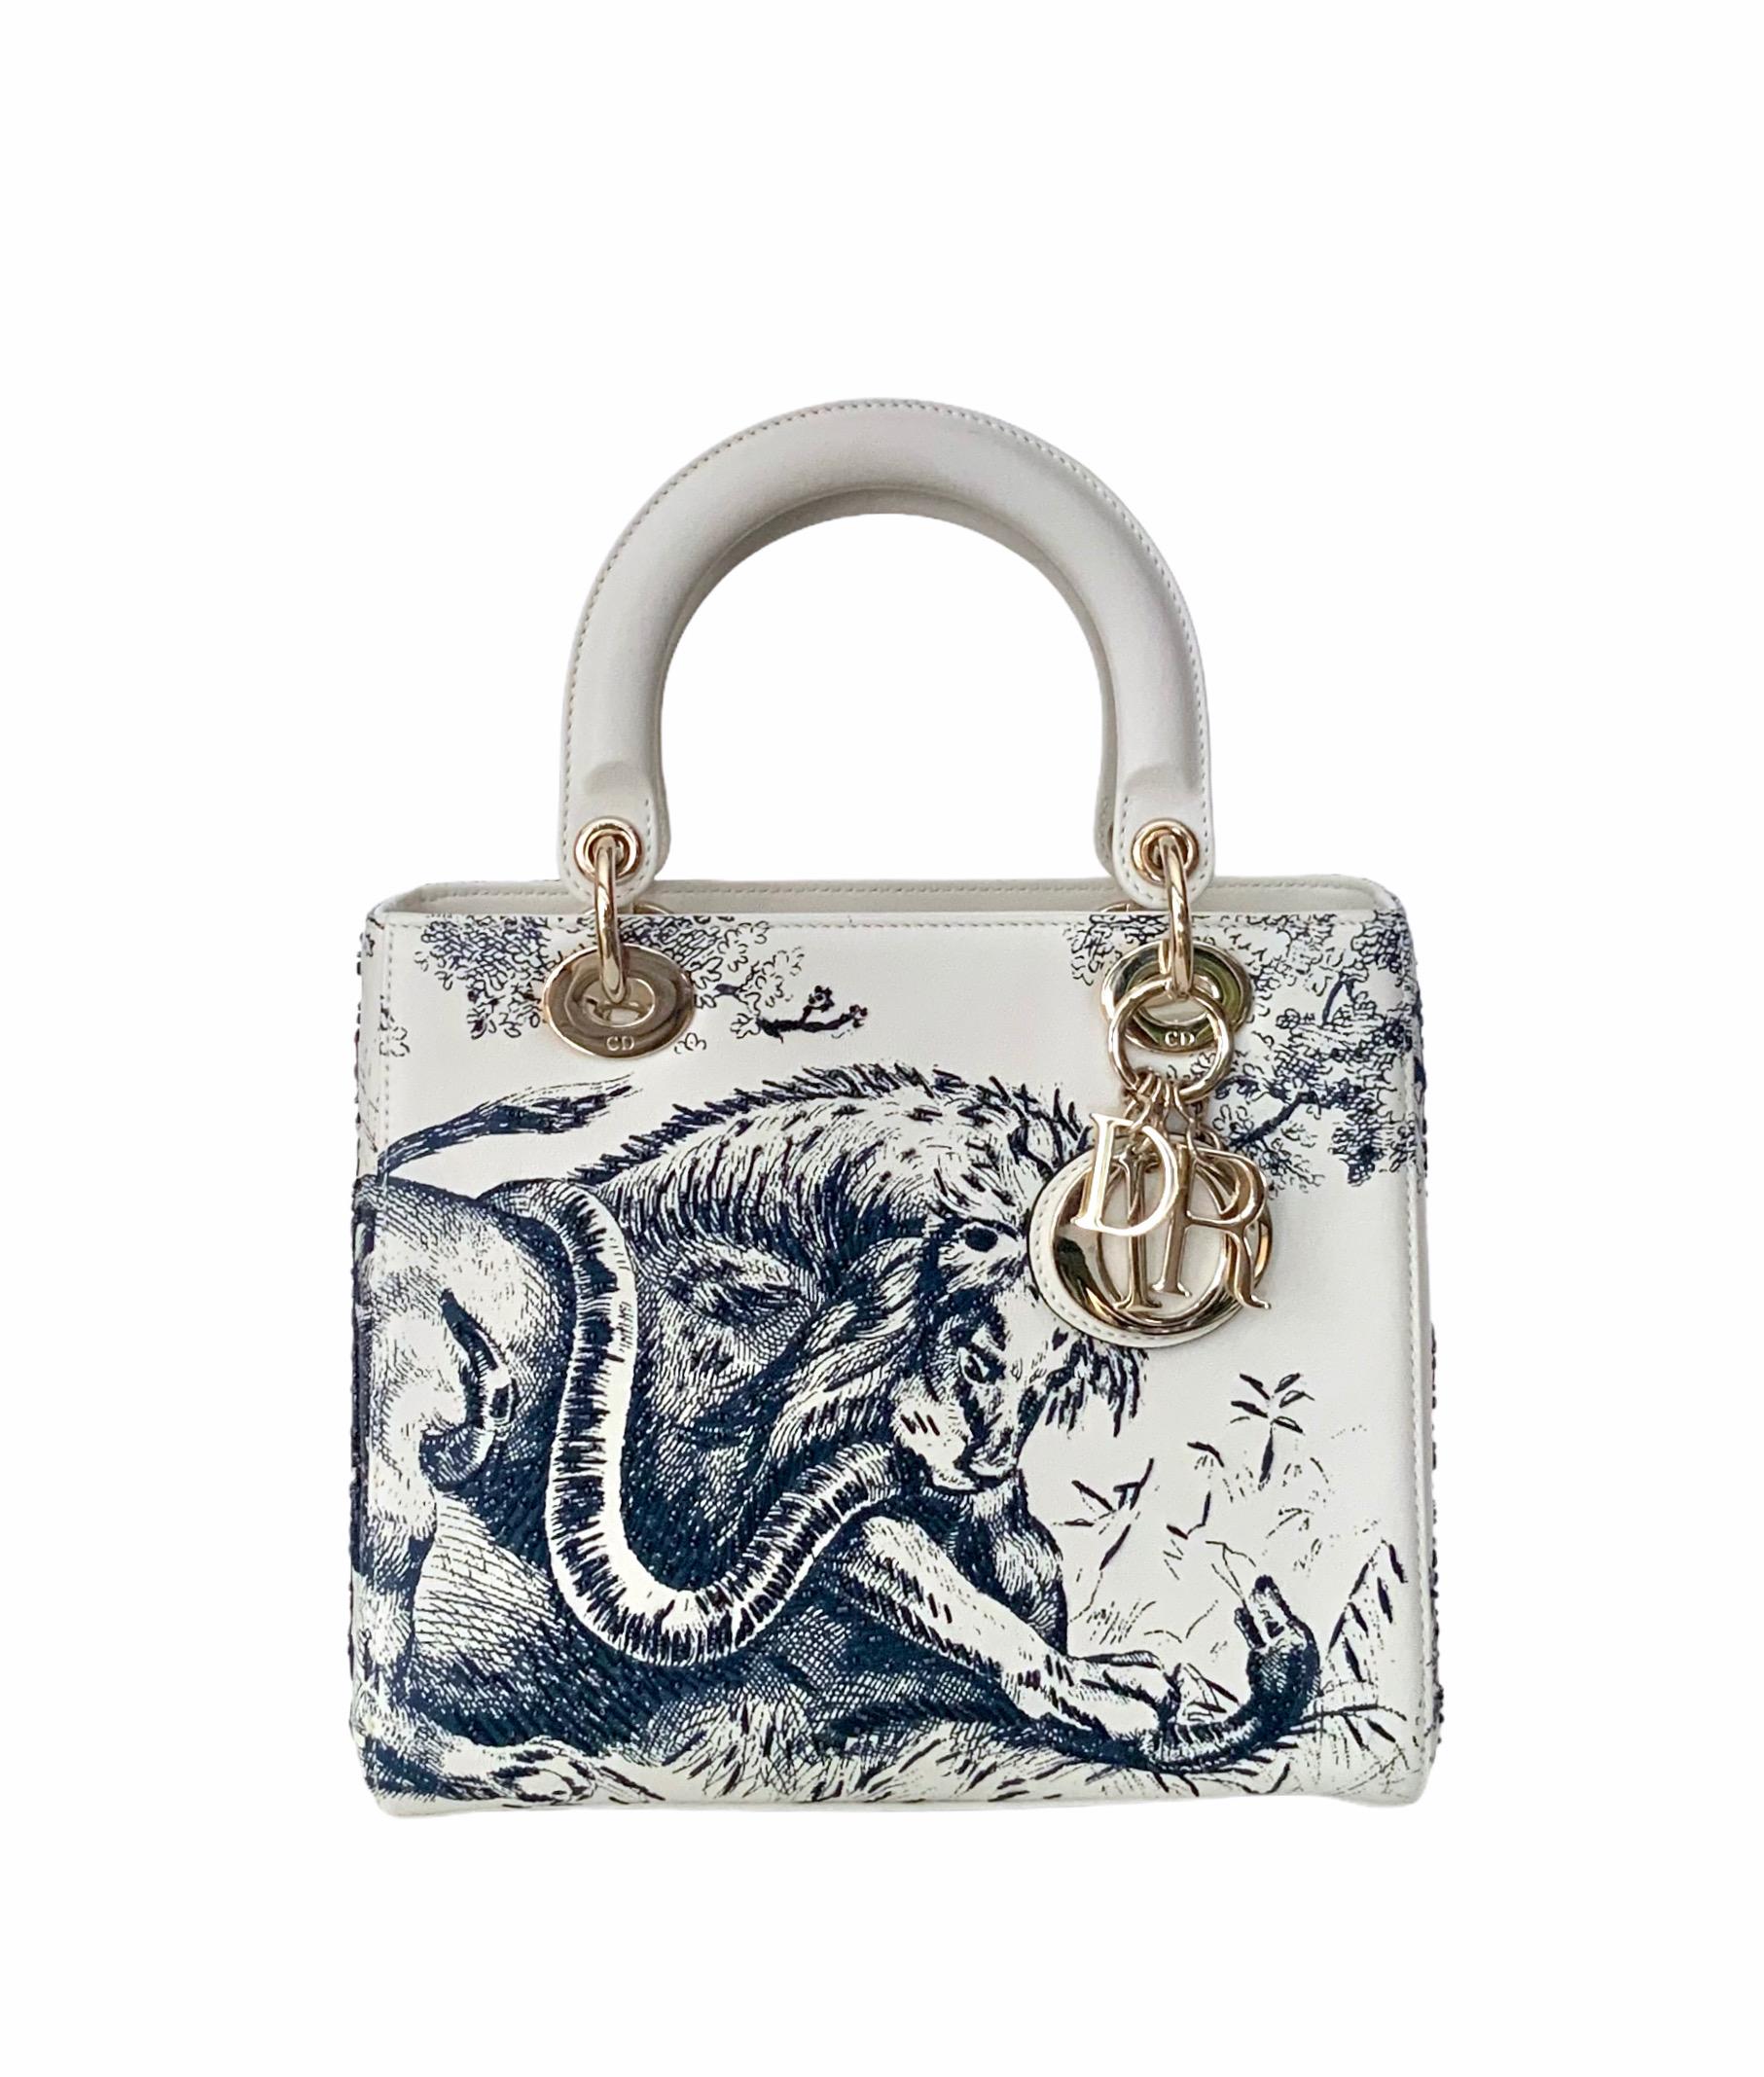 This Limited Edition Lady Dior bag is crafted in a delicate neutral calfskin leather and the Toile de Jouy print (dating from 1947 in the house of Christian Dior) has been enhanced with beadings. 
Another beautiful piece designed by Maria Grazia